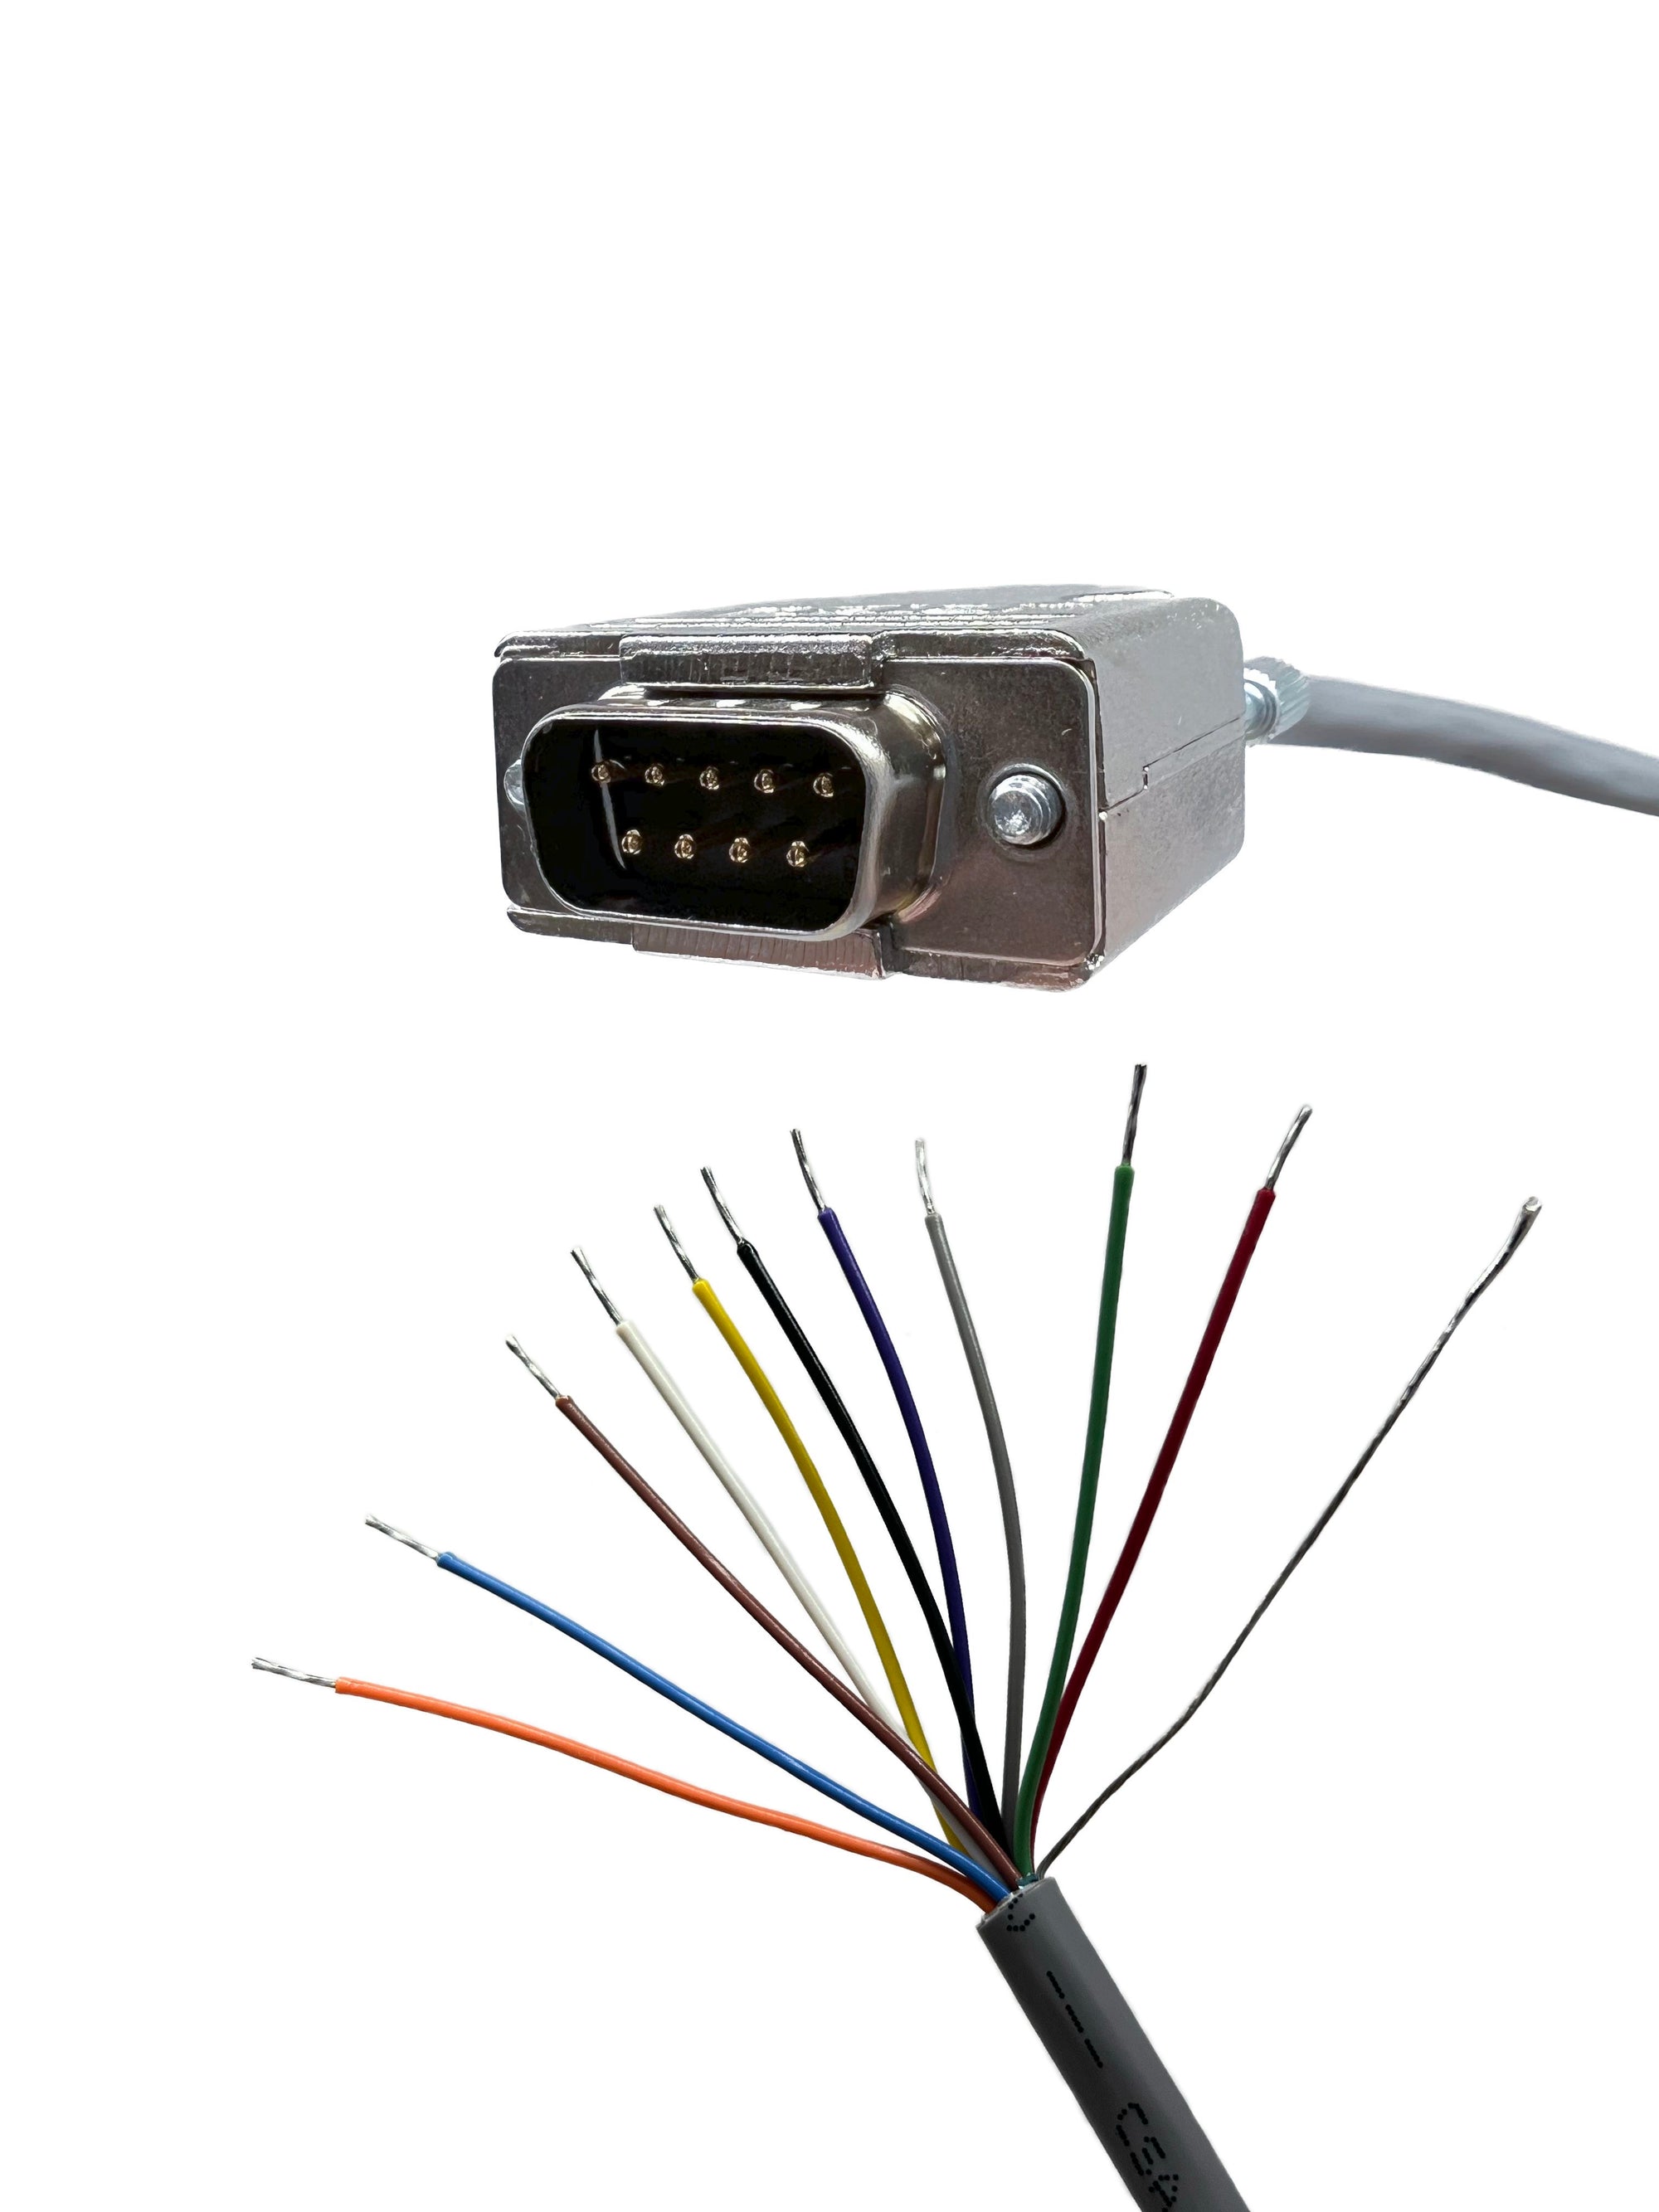 DB9 RS-232 Male to Blunt - Serial Breakout Cable